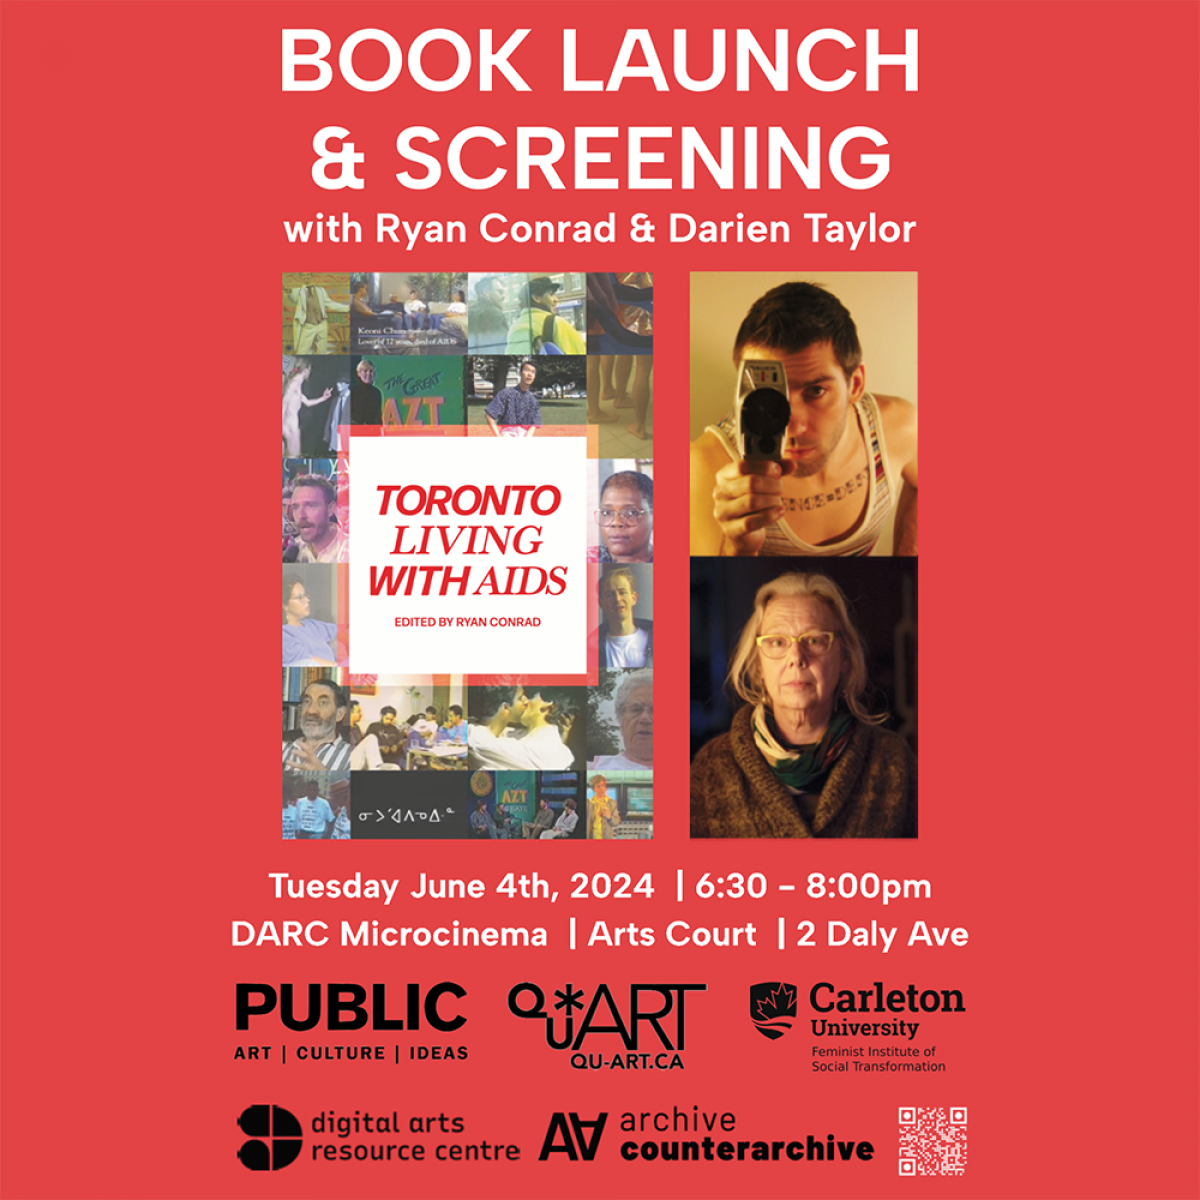 A square promotional image promoting a book launch and screening event organized by Ryan Conrad for a publication called "Toronto Living with AIDS." The event is happening on June 4th at DARC Microcinema in Ottawa. The image features a lot of text and includes a book cover and two portrait headshots of the speakers involved with the event.